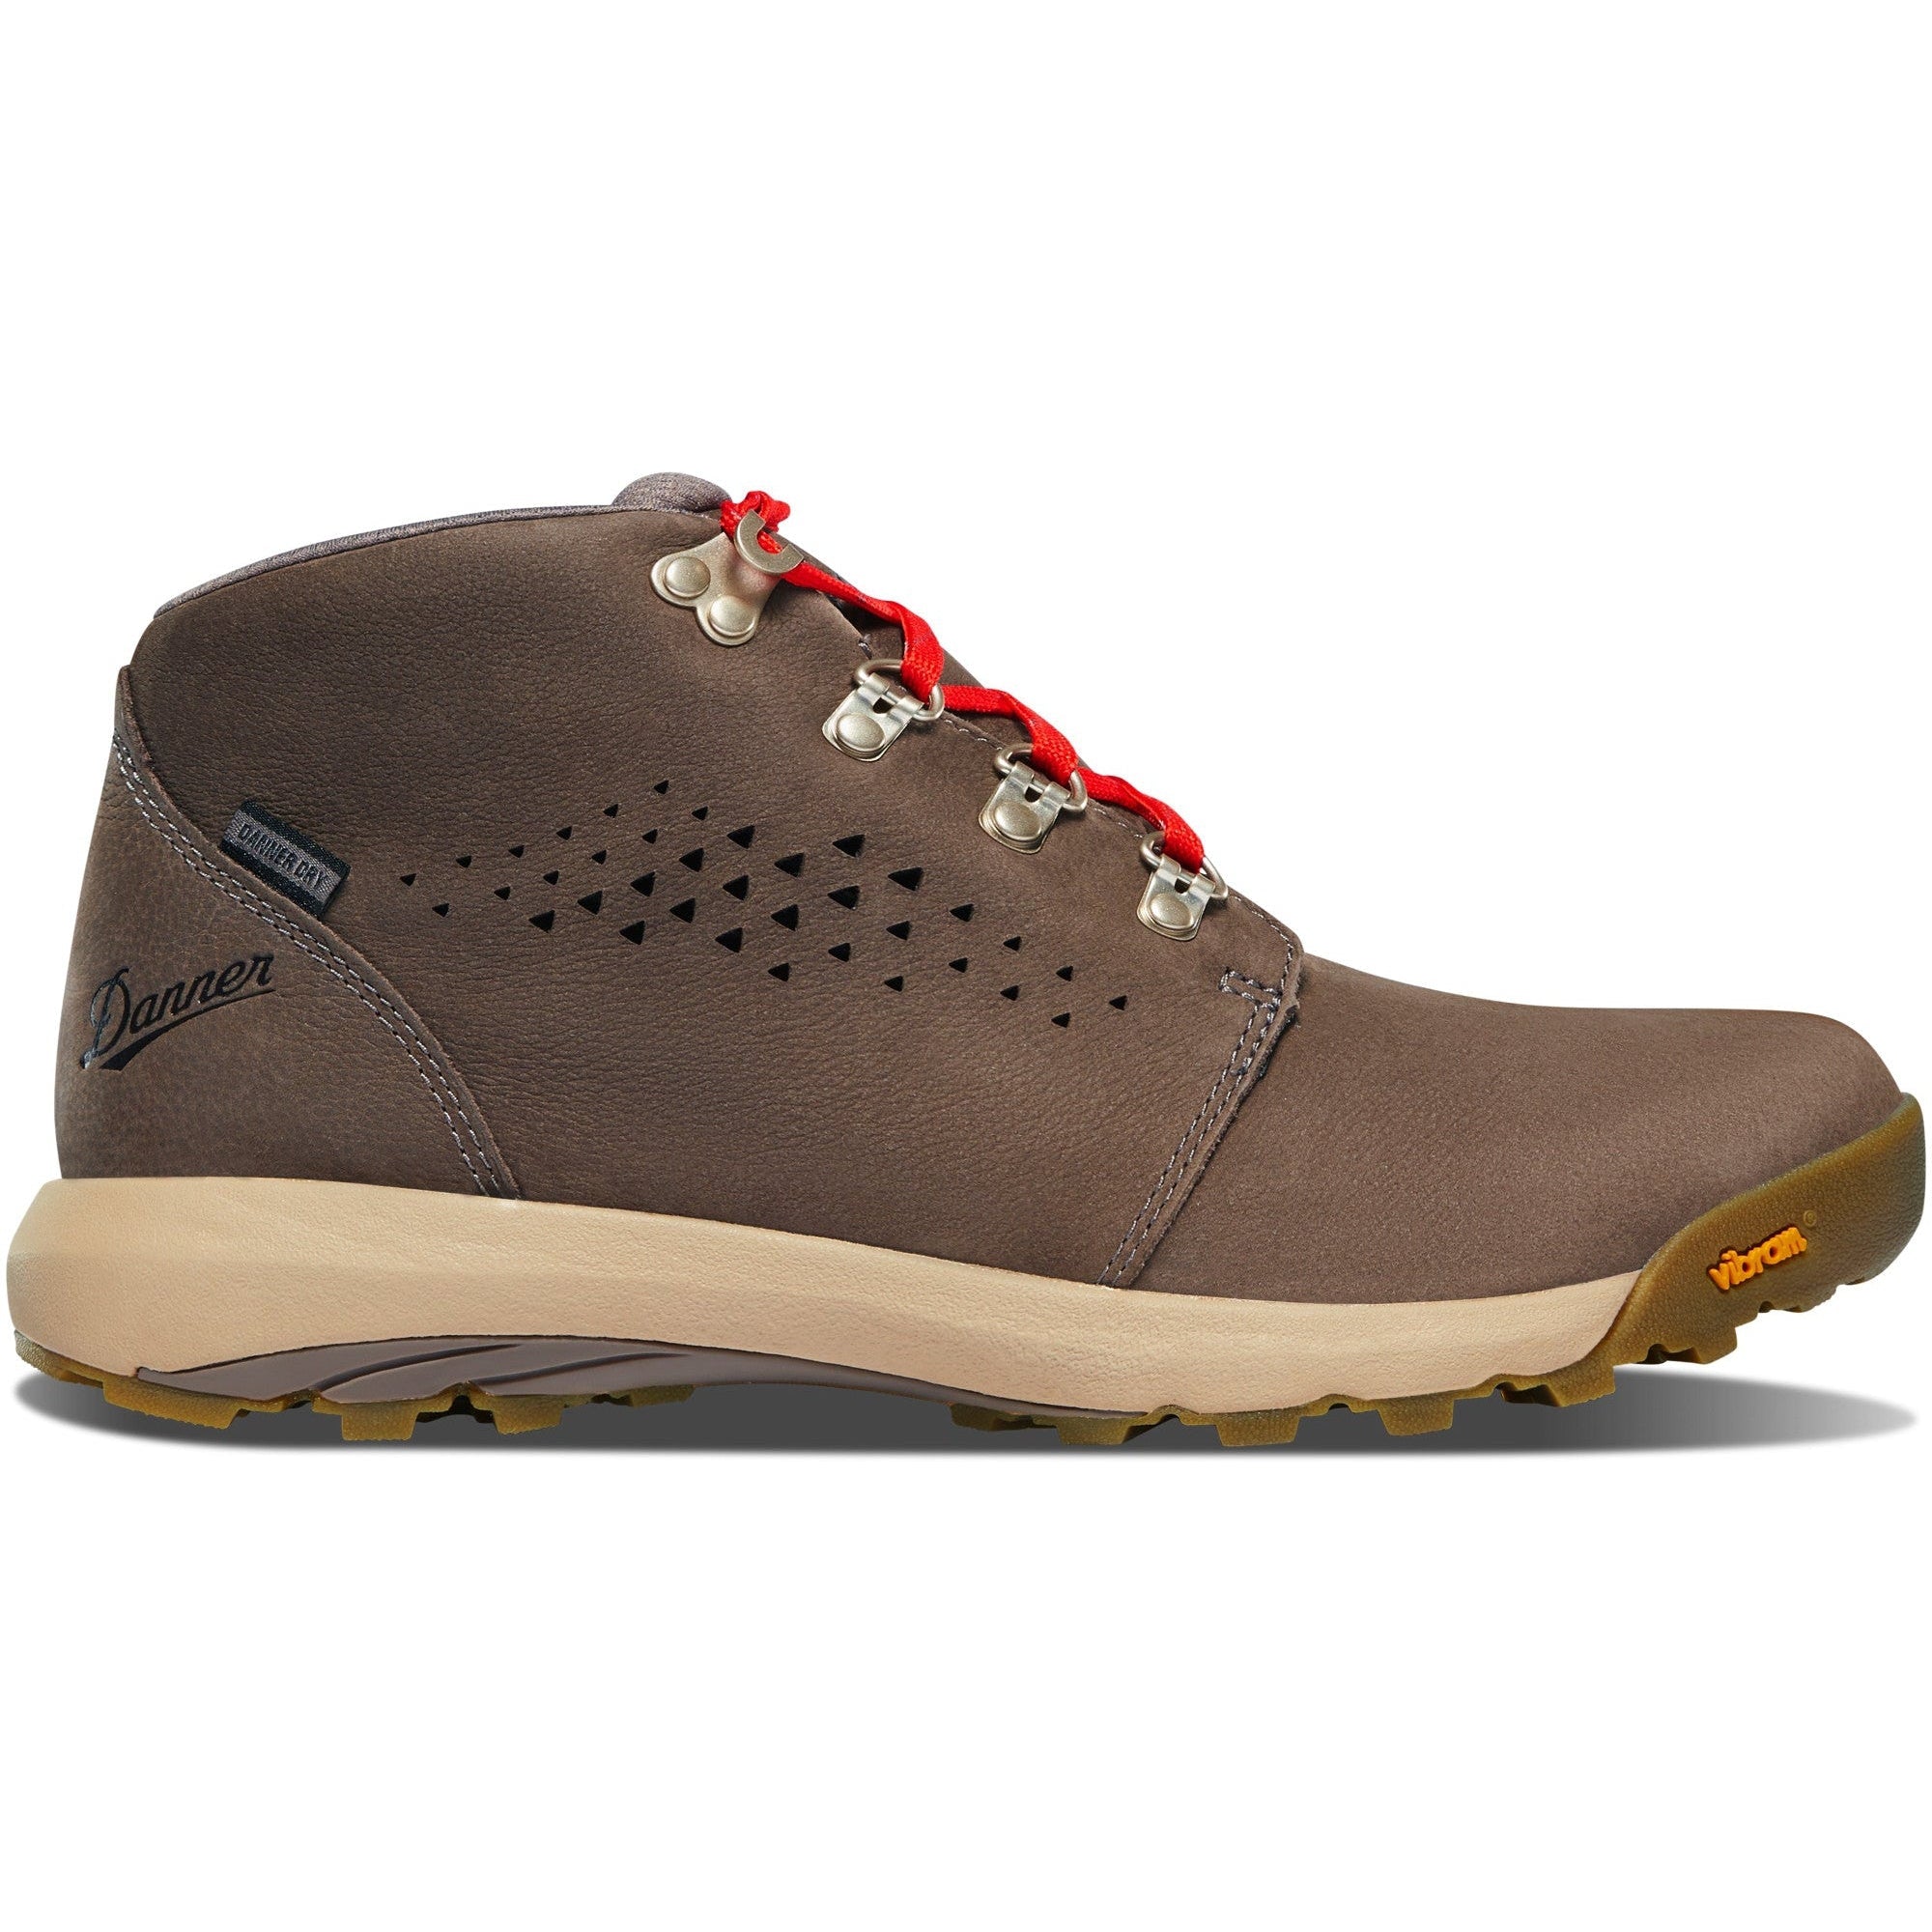 Danner Women's Inquire Chukka 4" WP Hiking Boot - Iron/Picante - 64505  - Overlook Boots